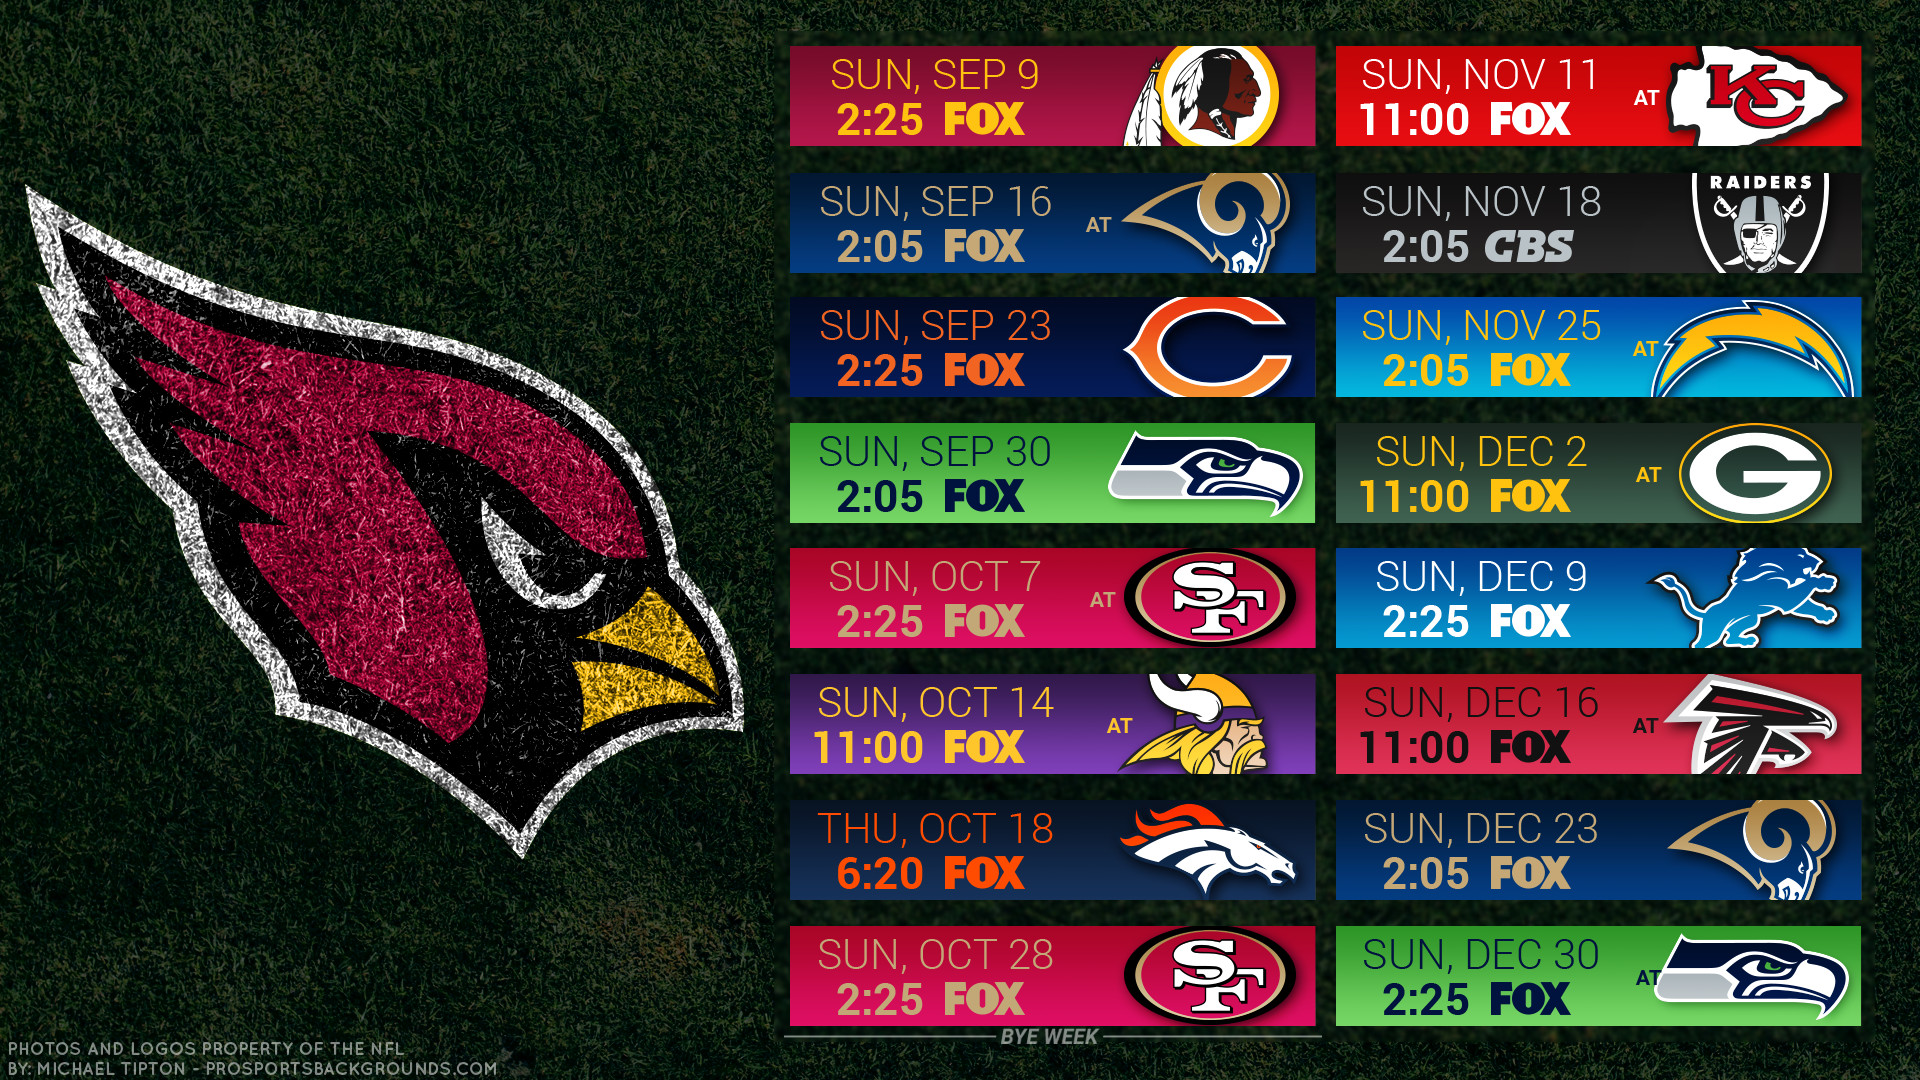 1920x1080 Arizona Cardinals 2018 schedule turf logo wallpaper free for desktop pc  iphone galaxy and andriod printable